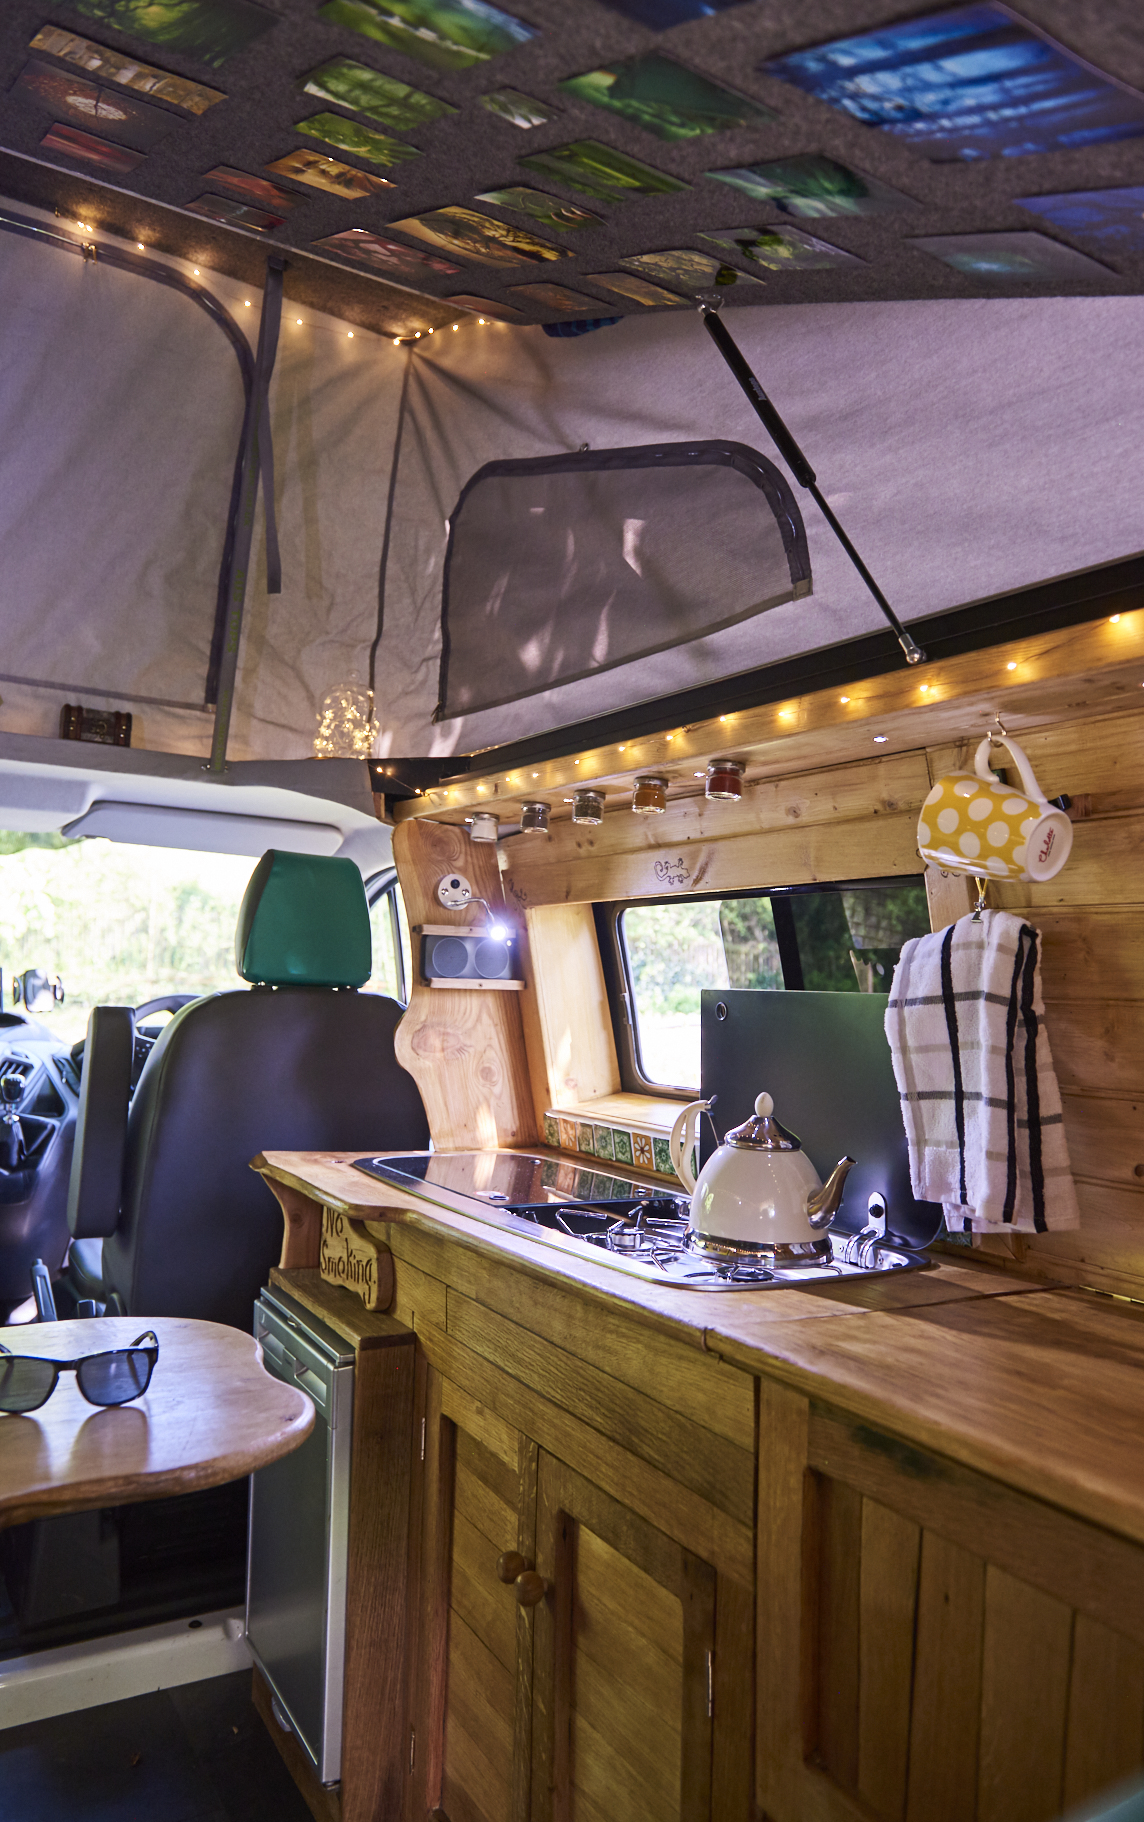 Interior of a camper van showcasing a compact kitchen. It features a stovetop with a kettle, a wooden countertop, spice jars mounted above, a checkered towel hanging, and a yellow polka-dotted mug. The van has green seat covers and is well-lit with both natural light from windows and string lights.